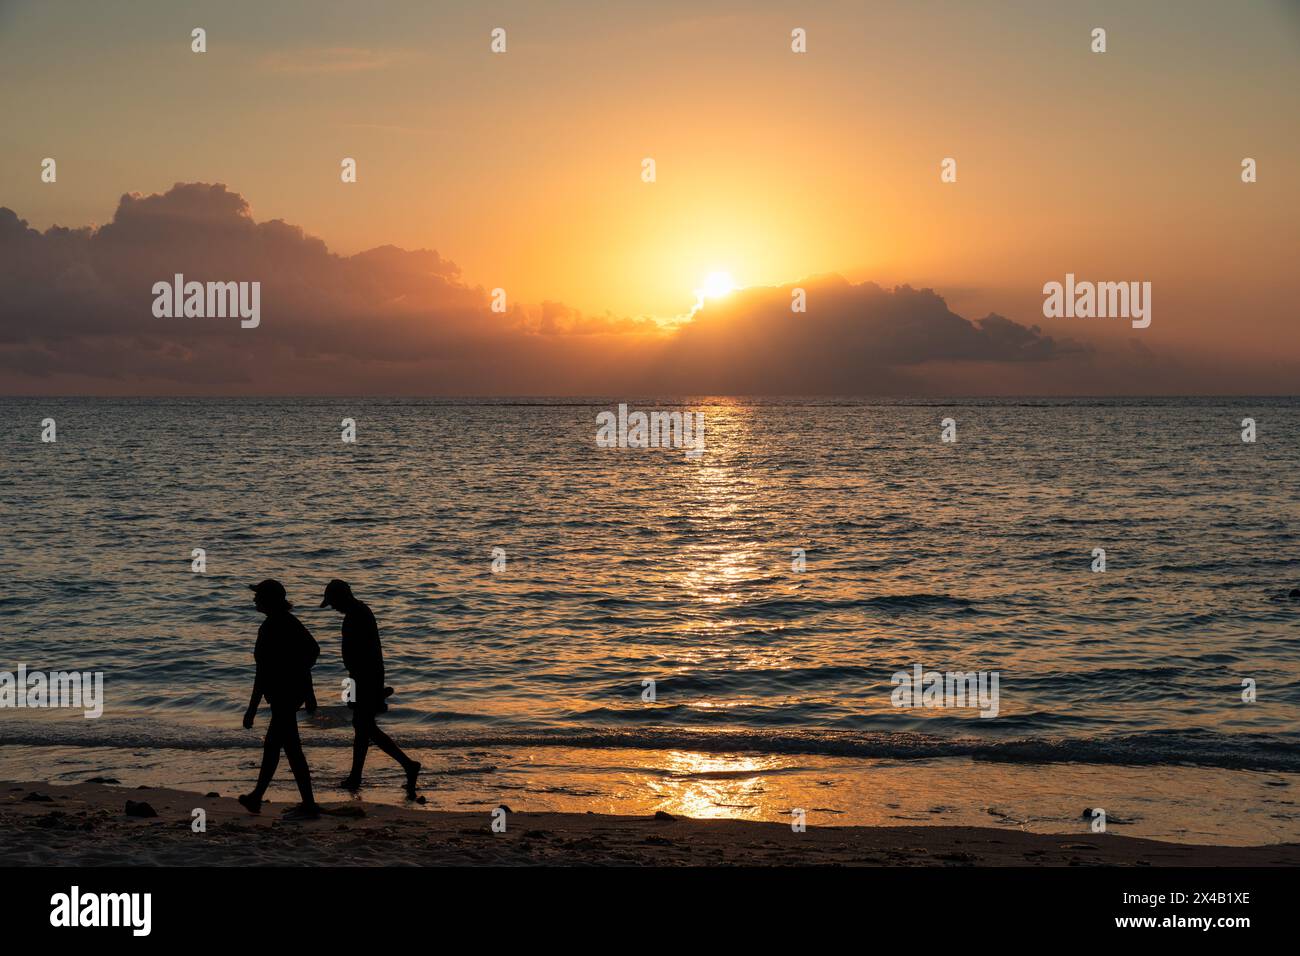 Two people walking on a beach at sunset. The sky is orange and the water is calm Stock Photo